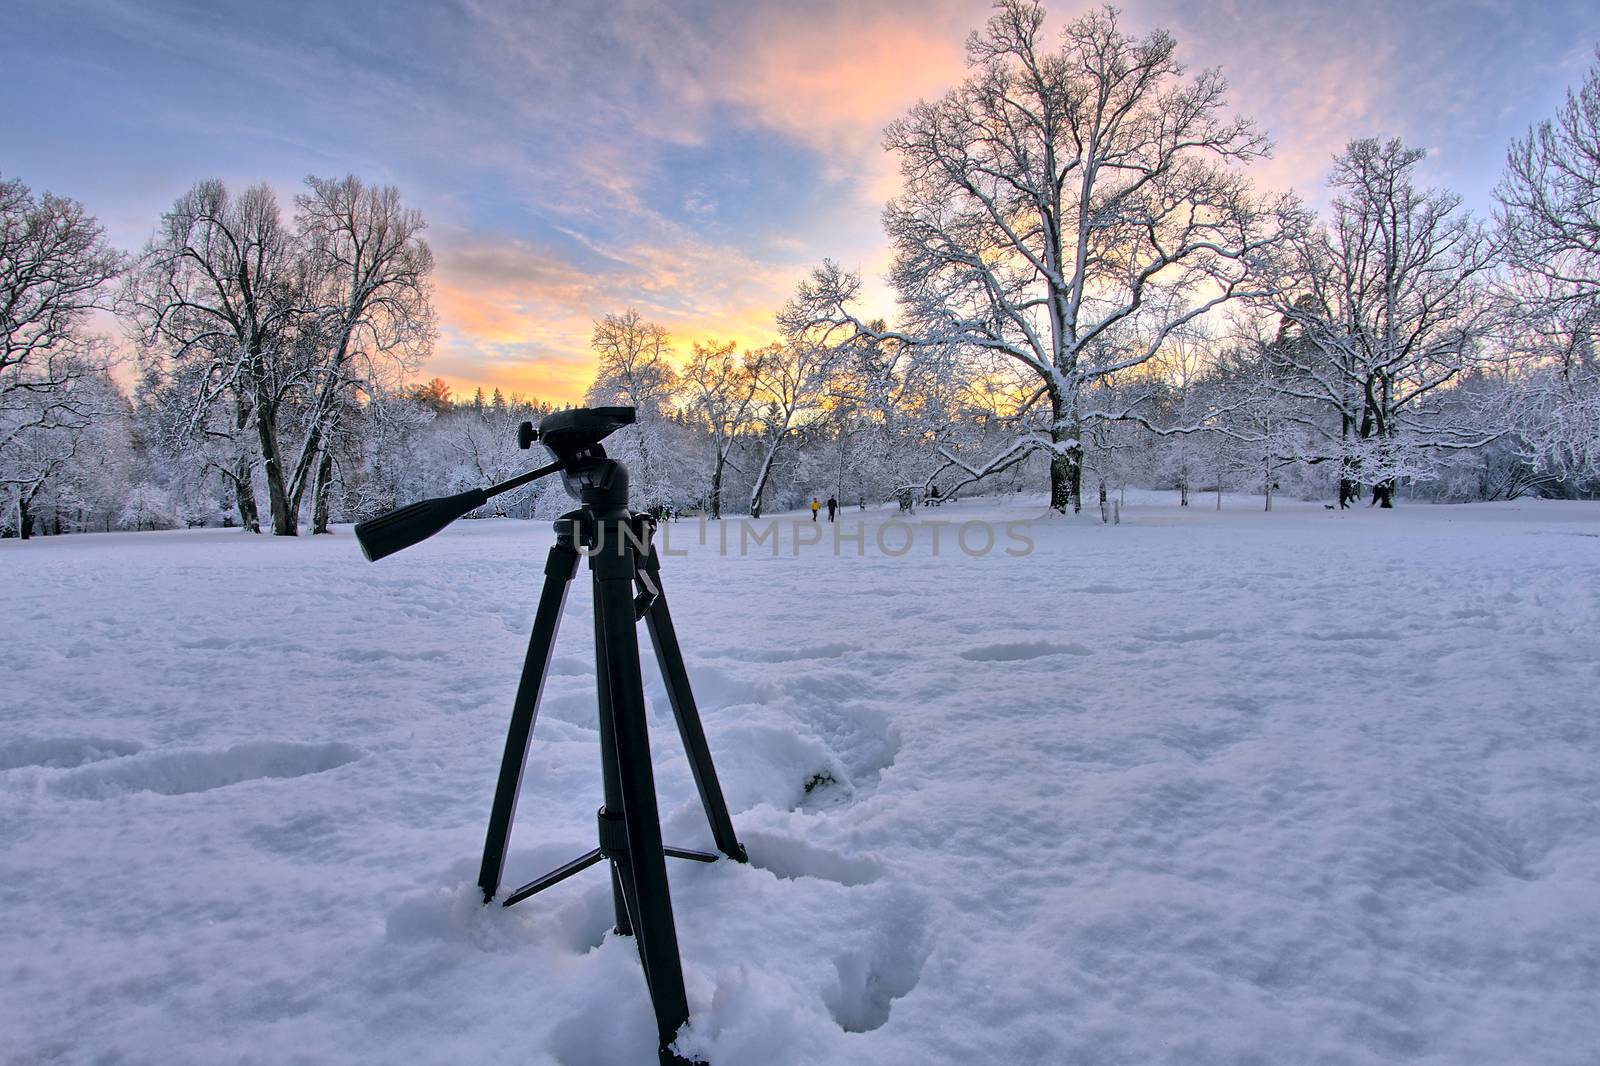 Behind the scenes of a photoshoot of landscape photographer. Capturing of a stunning winter sunset in the snowy forest. Tripod still standing in the snow.